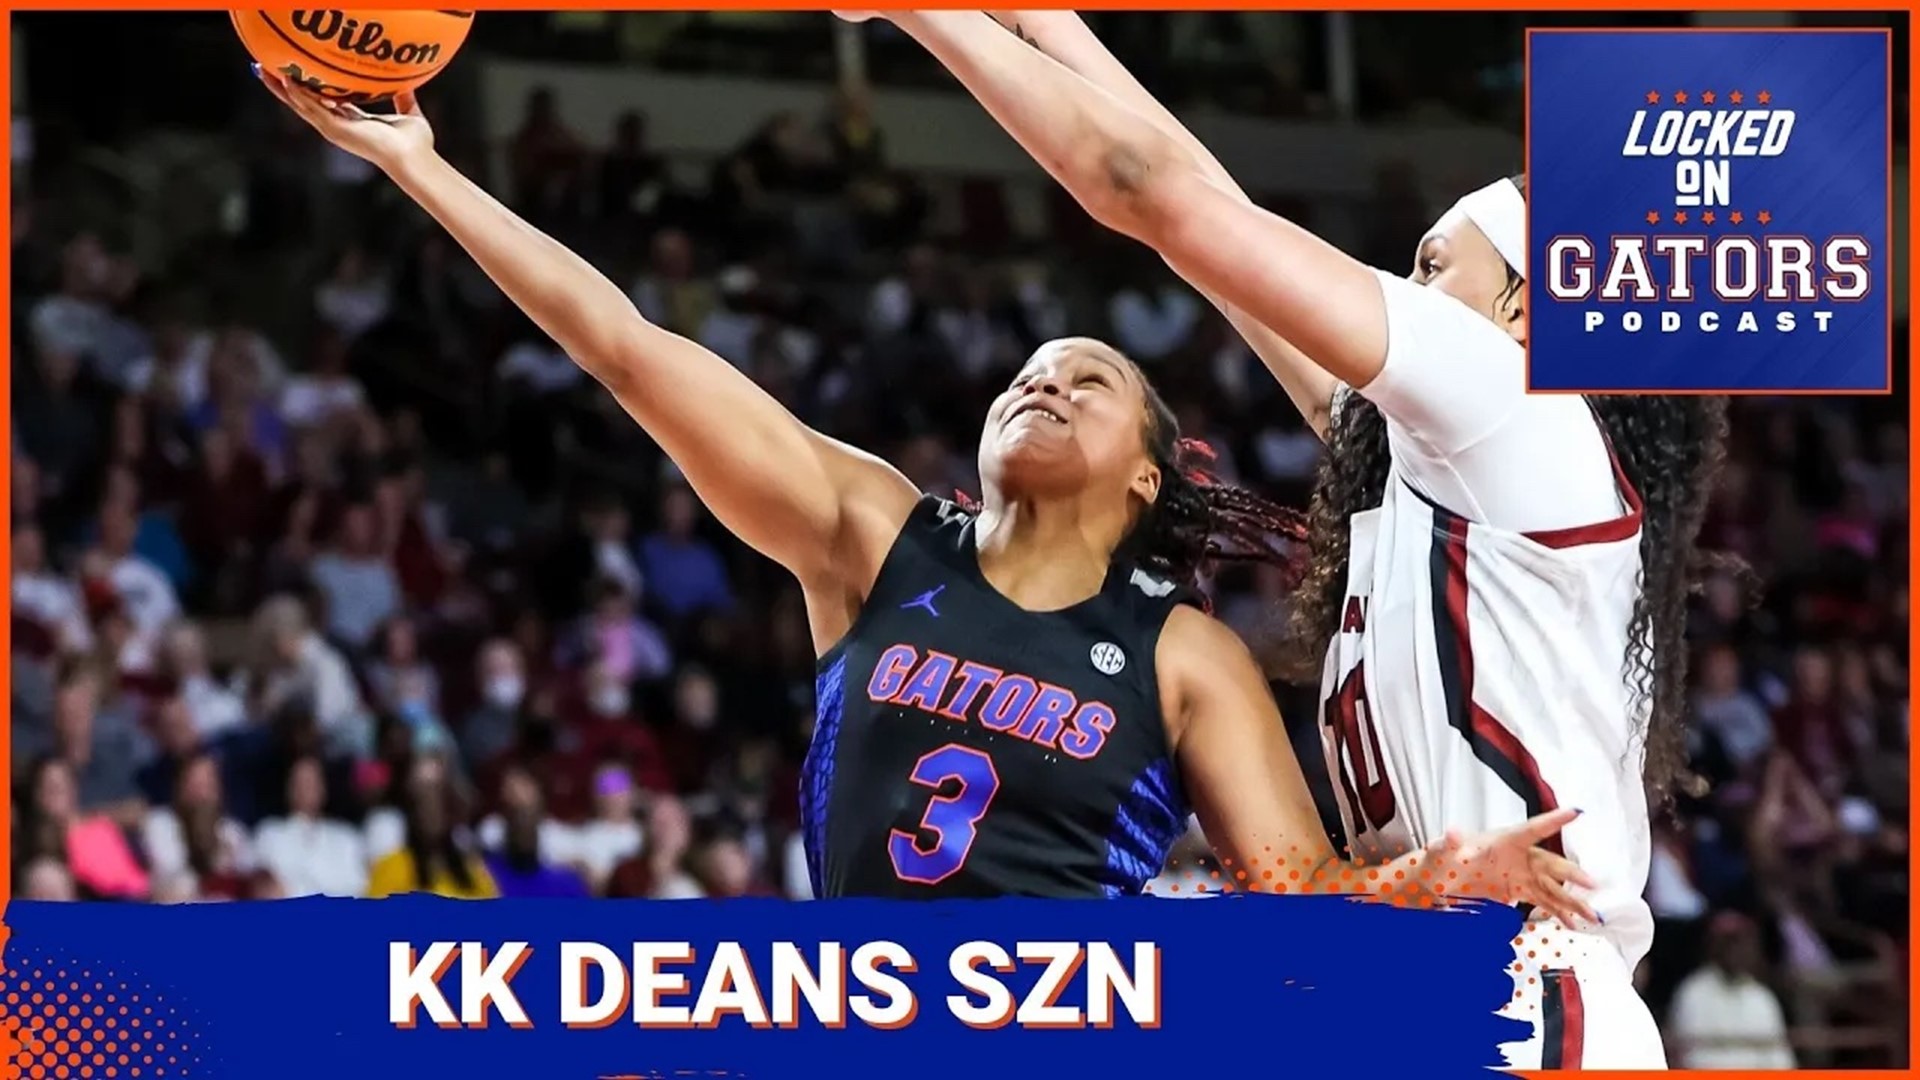 The Florida Gators women's basketball team is taking on the Clemson Tigers in the third round of the WNIT Thursday night, and guard KK Deans joins the show.